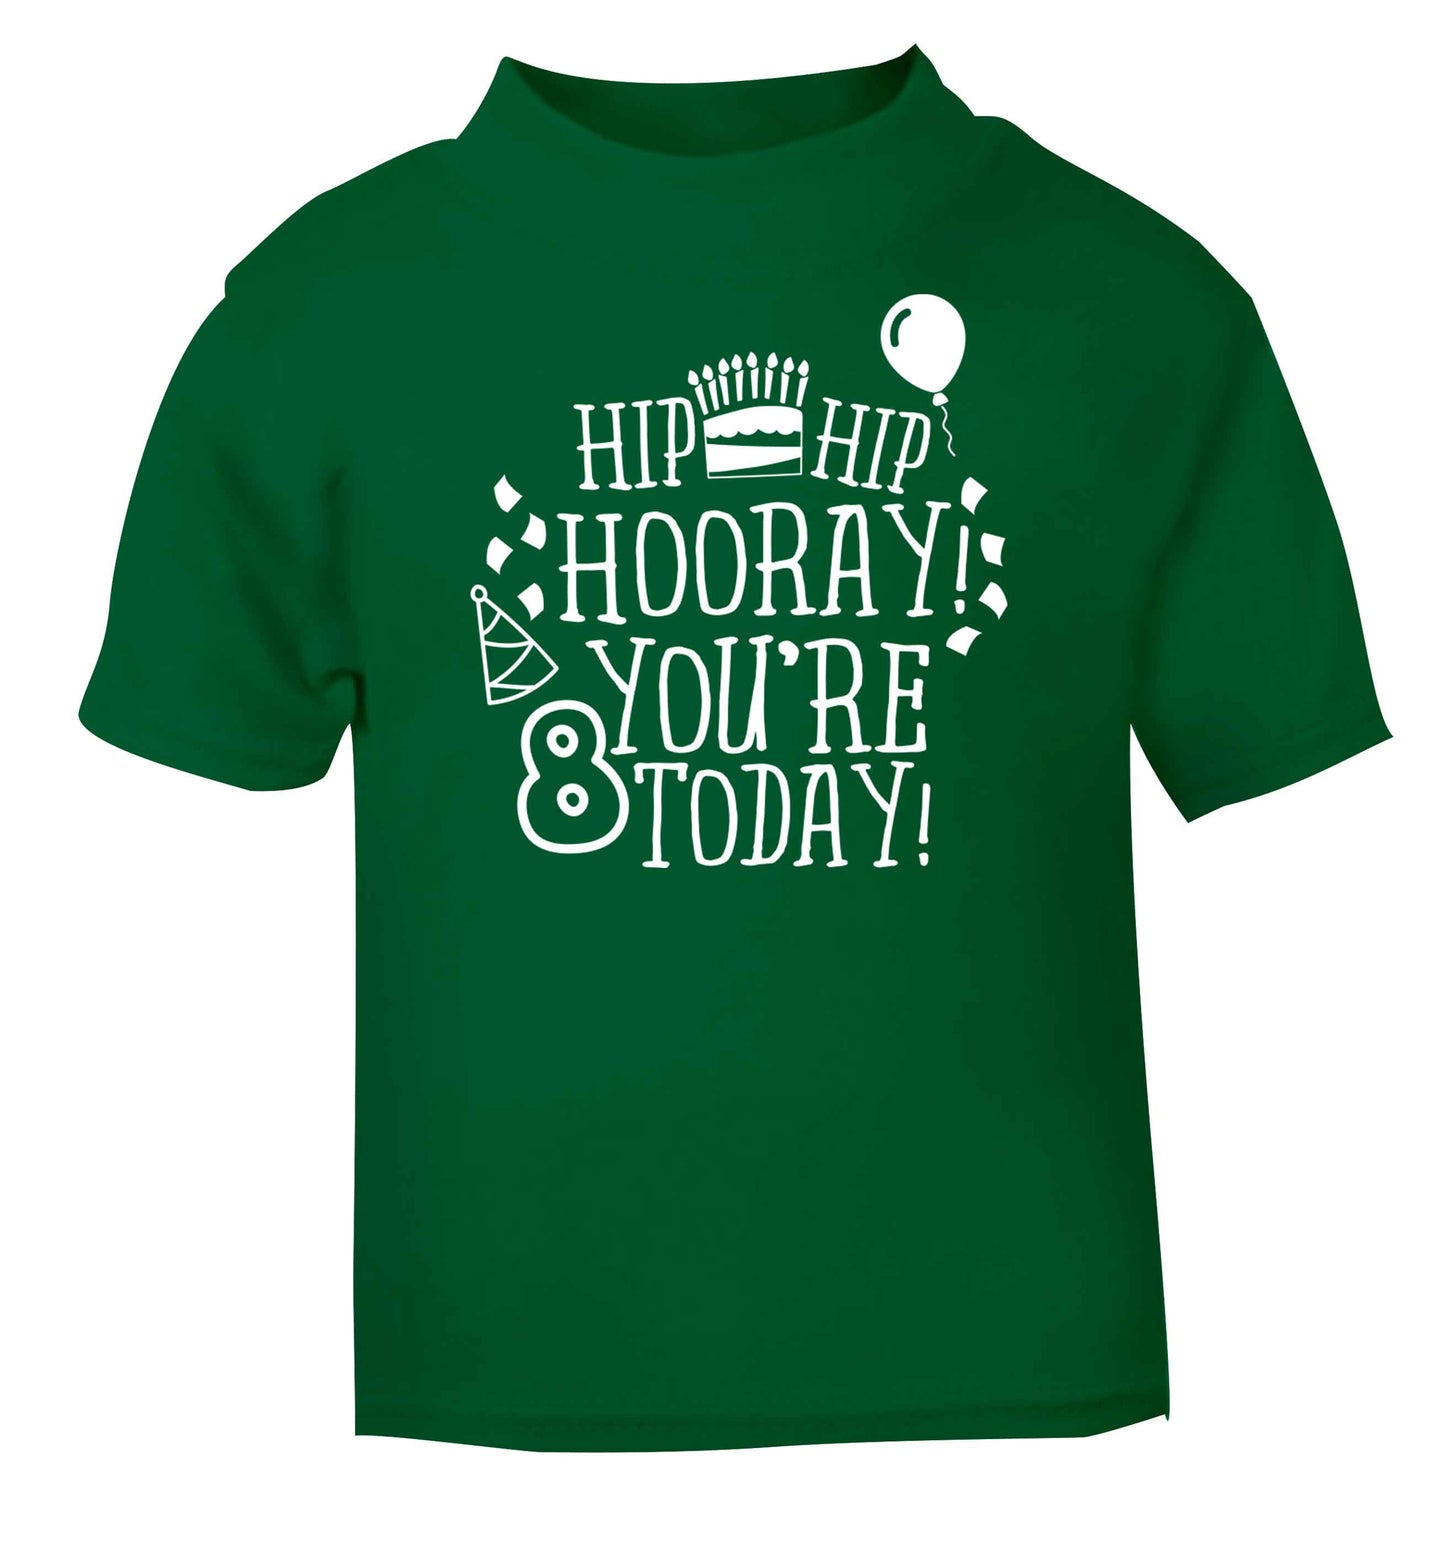 Hip hip hooray you're 8 today! green baby toddler Tshirt 2 Years